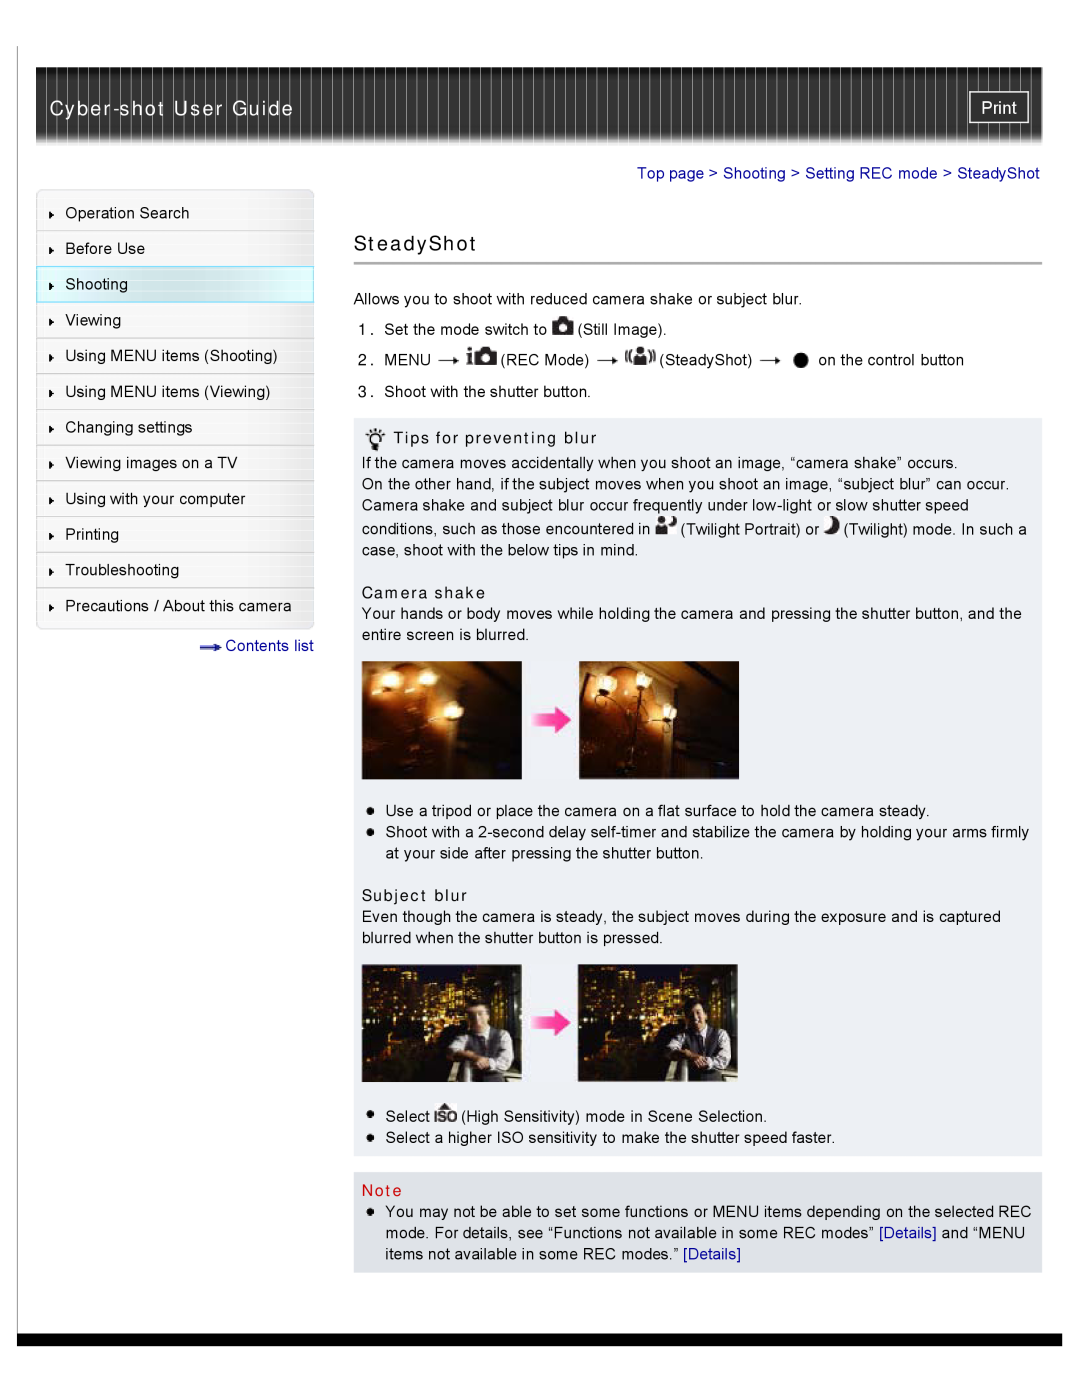 Sony DSC-W510 Cyber-shot User Guide, Print, Contents list, Top page Shooting Setting REC mode SteadyShot, Camera shake 